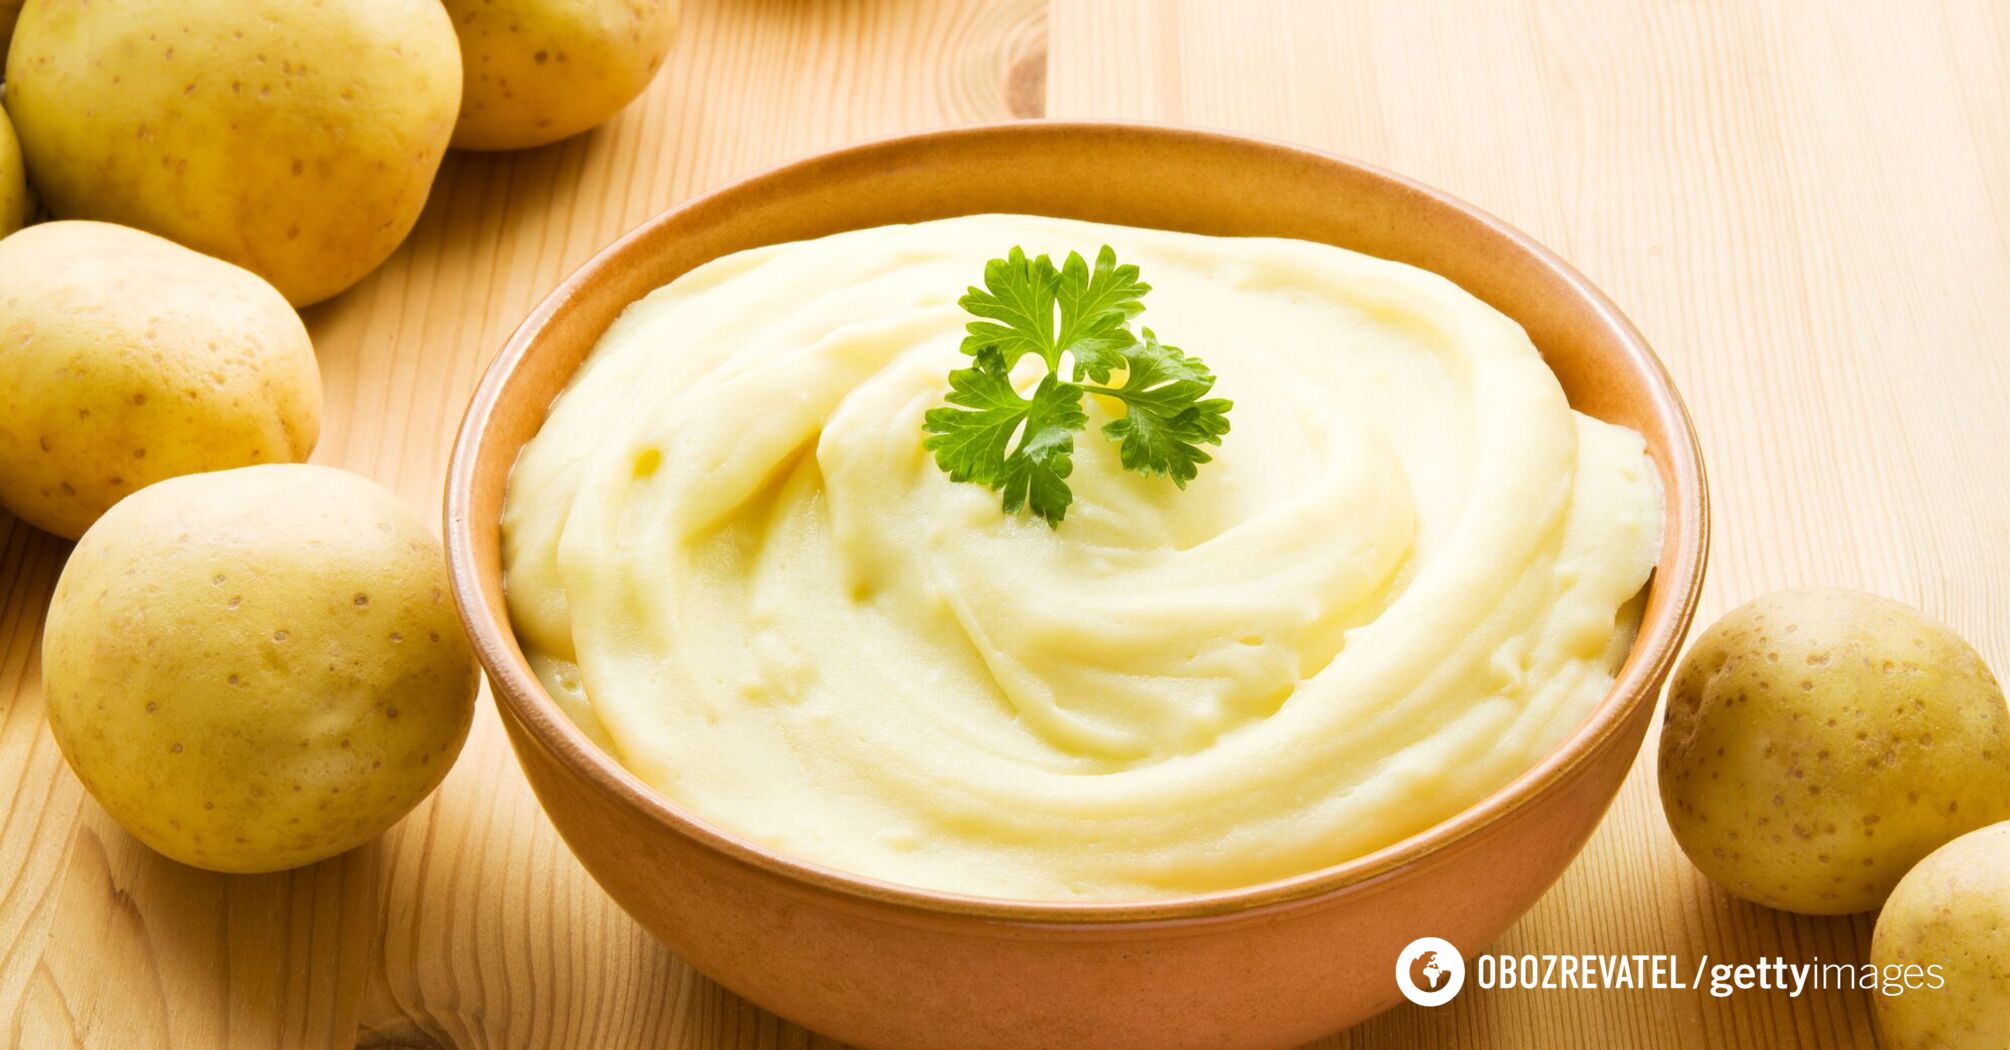 How to cook delicious mashed potatoes